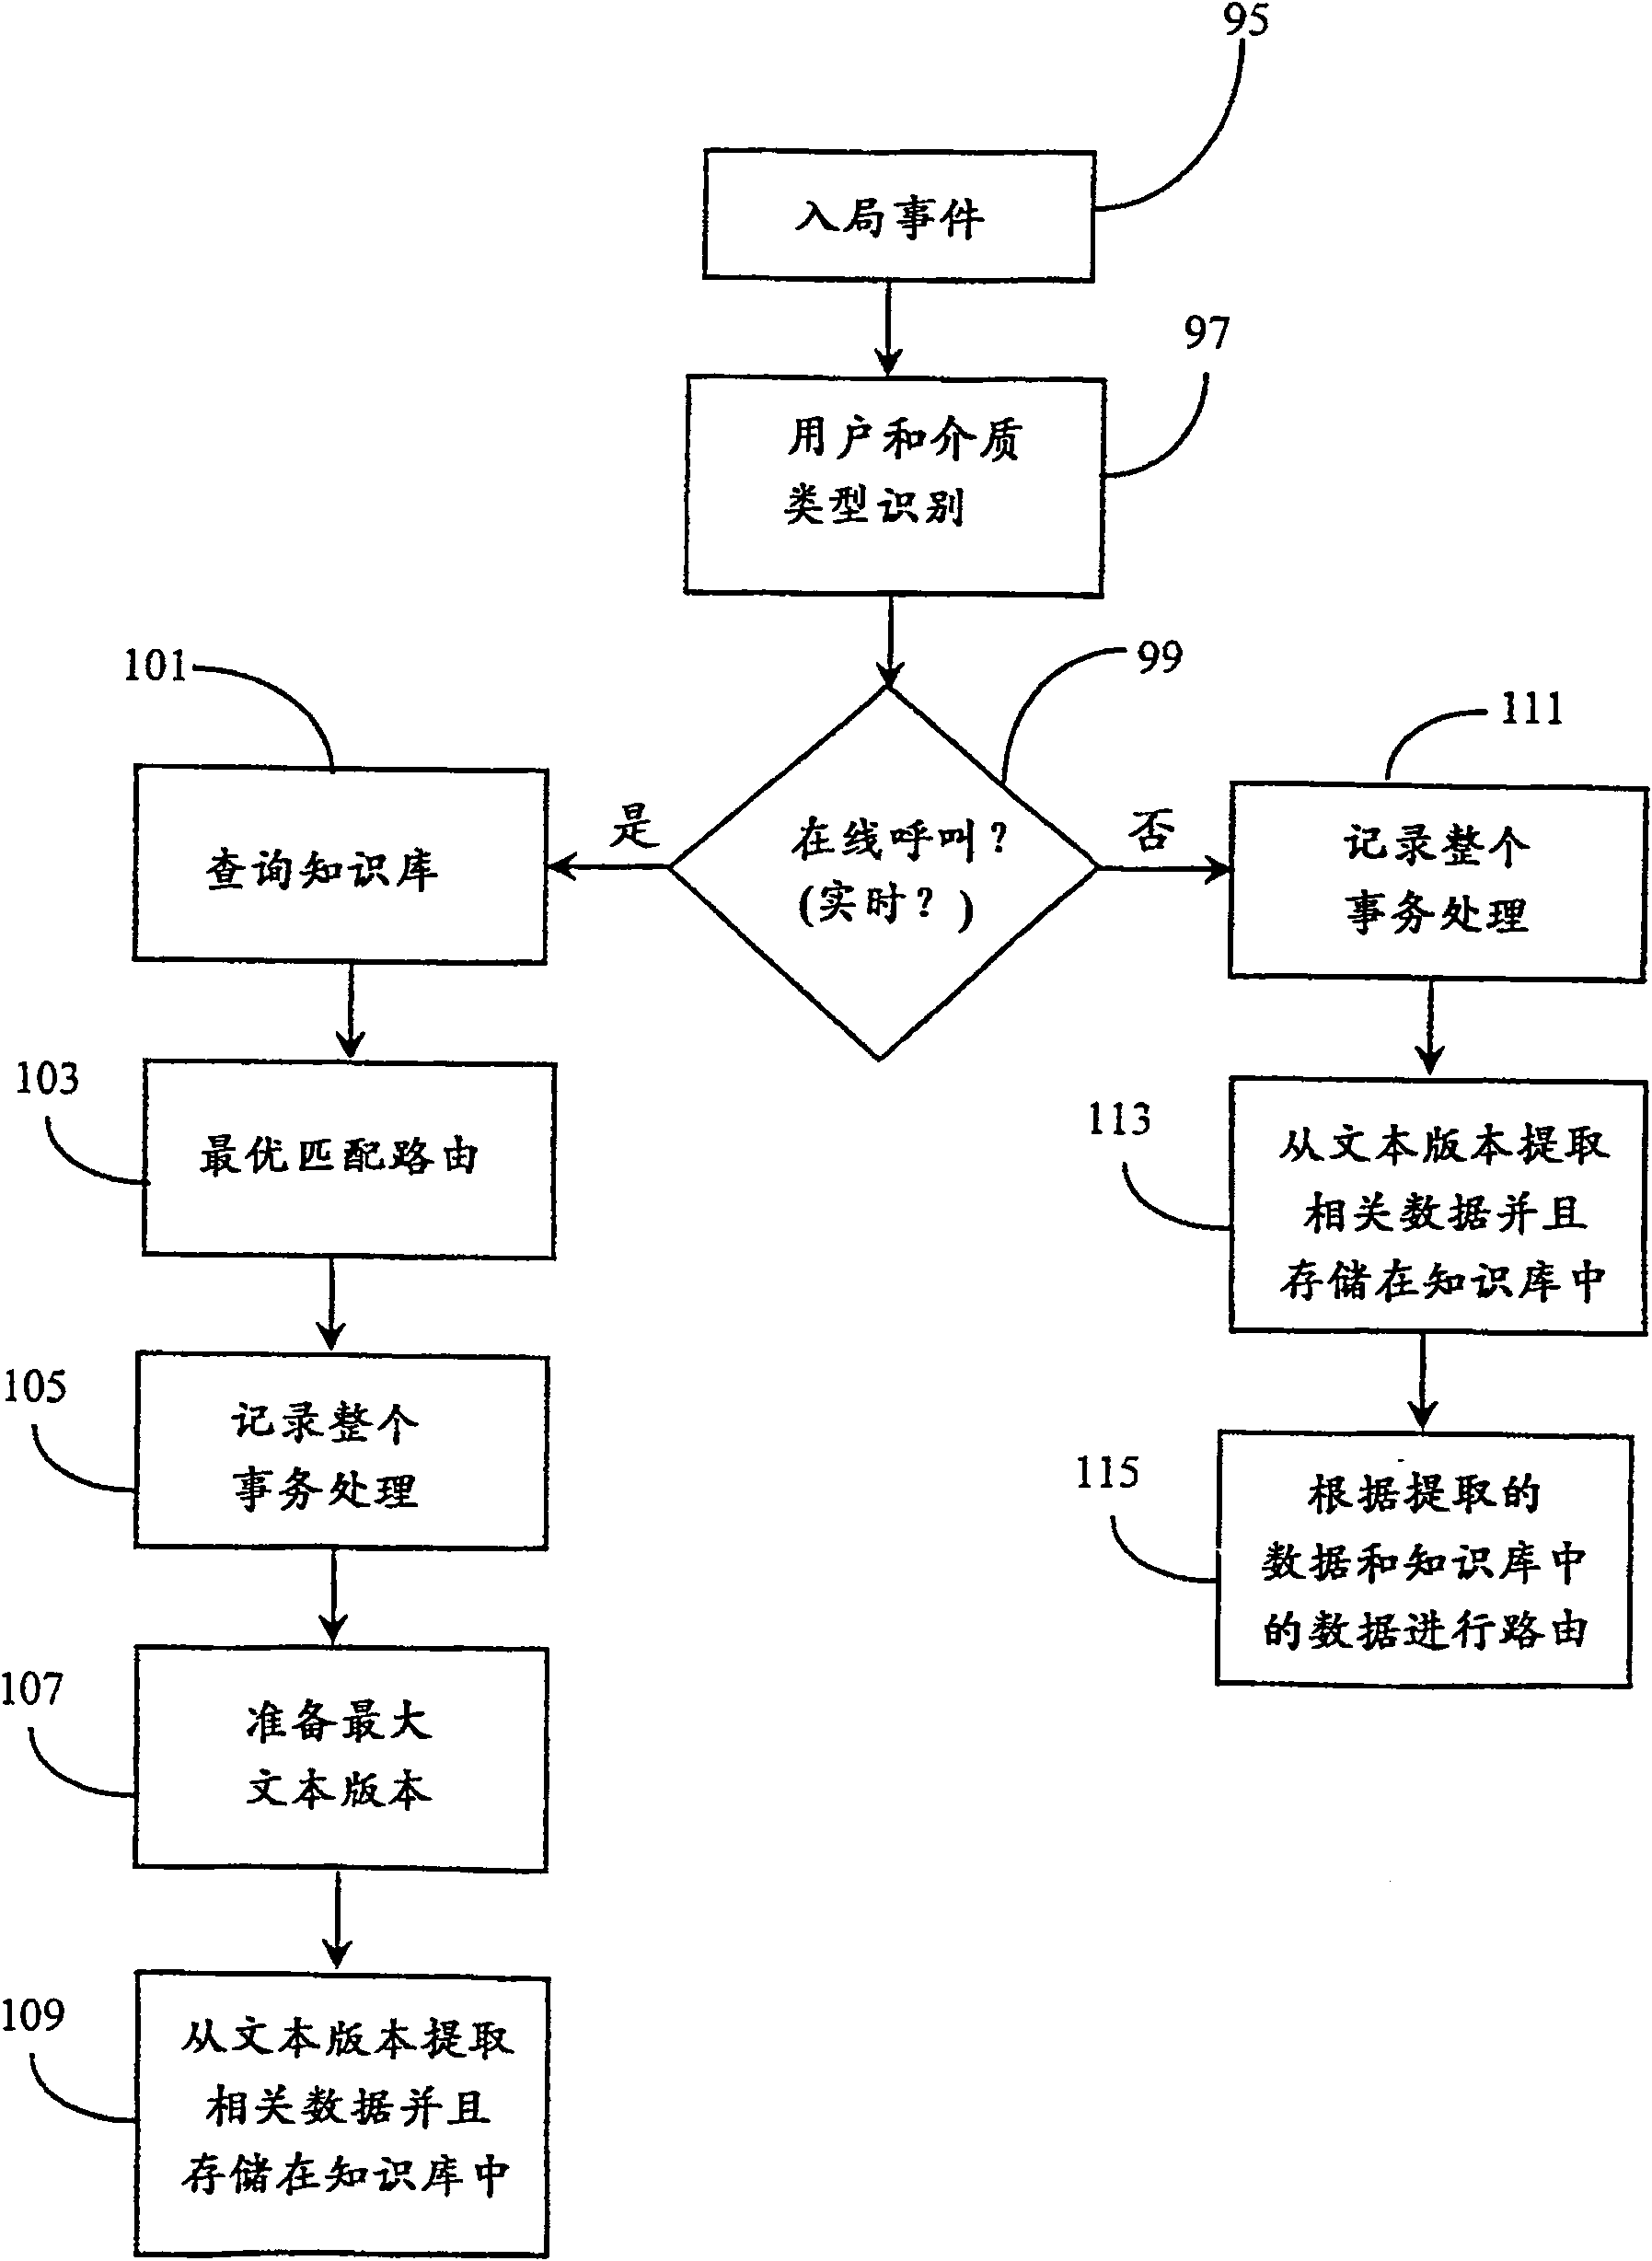 Method for managing interaction between partner for processing transaction